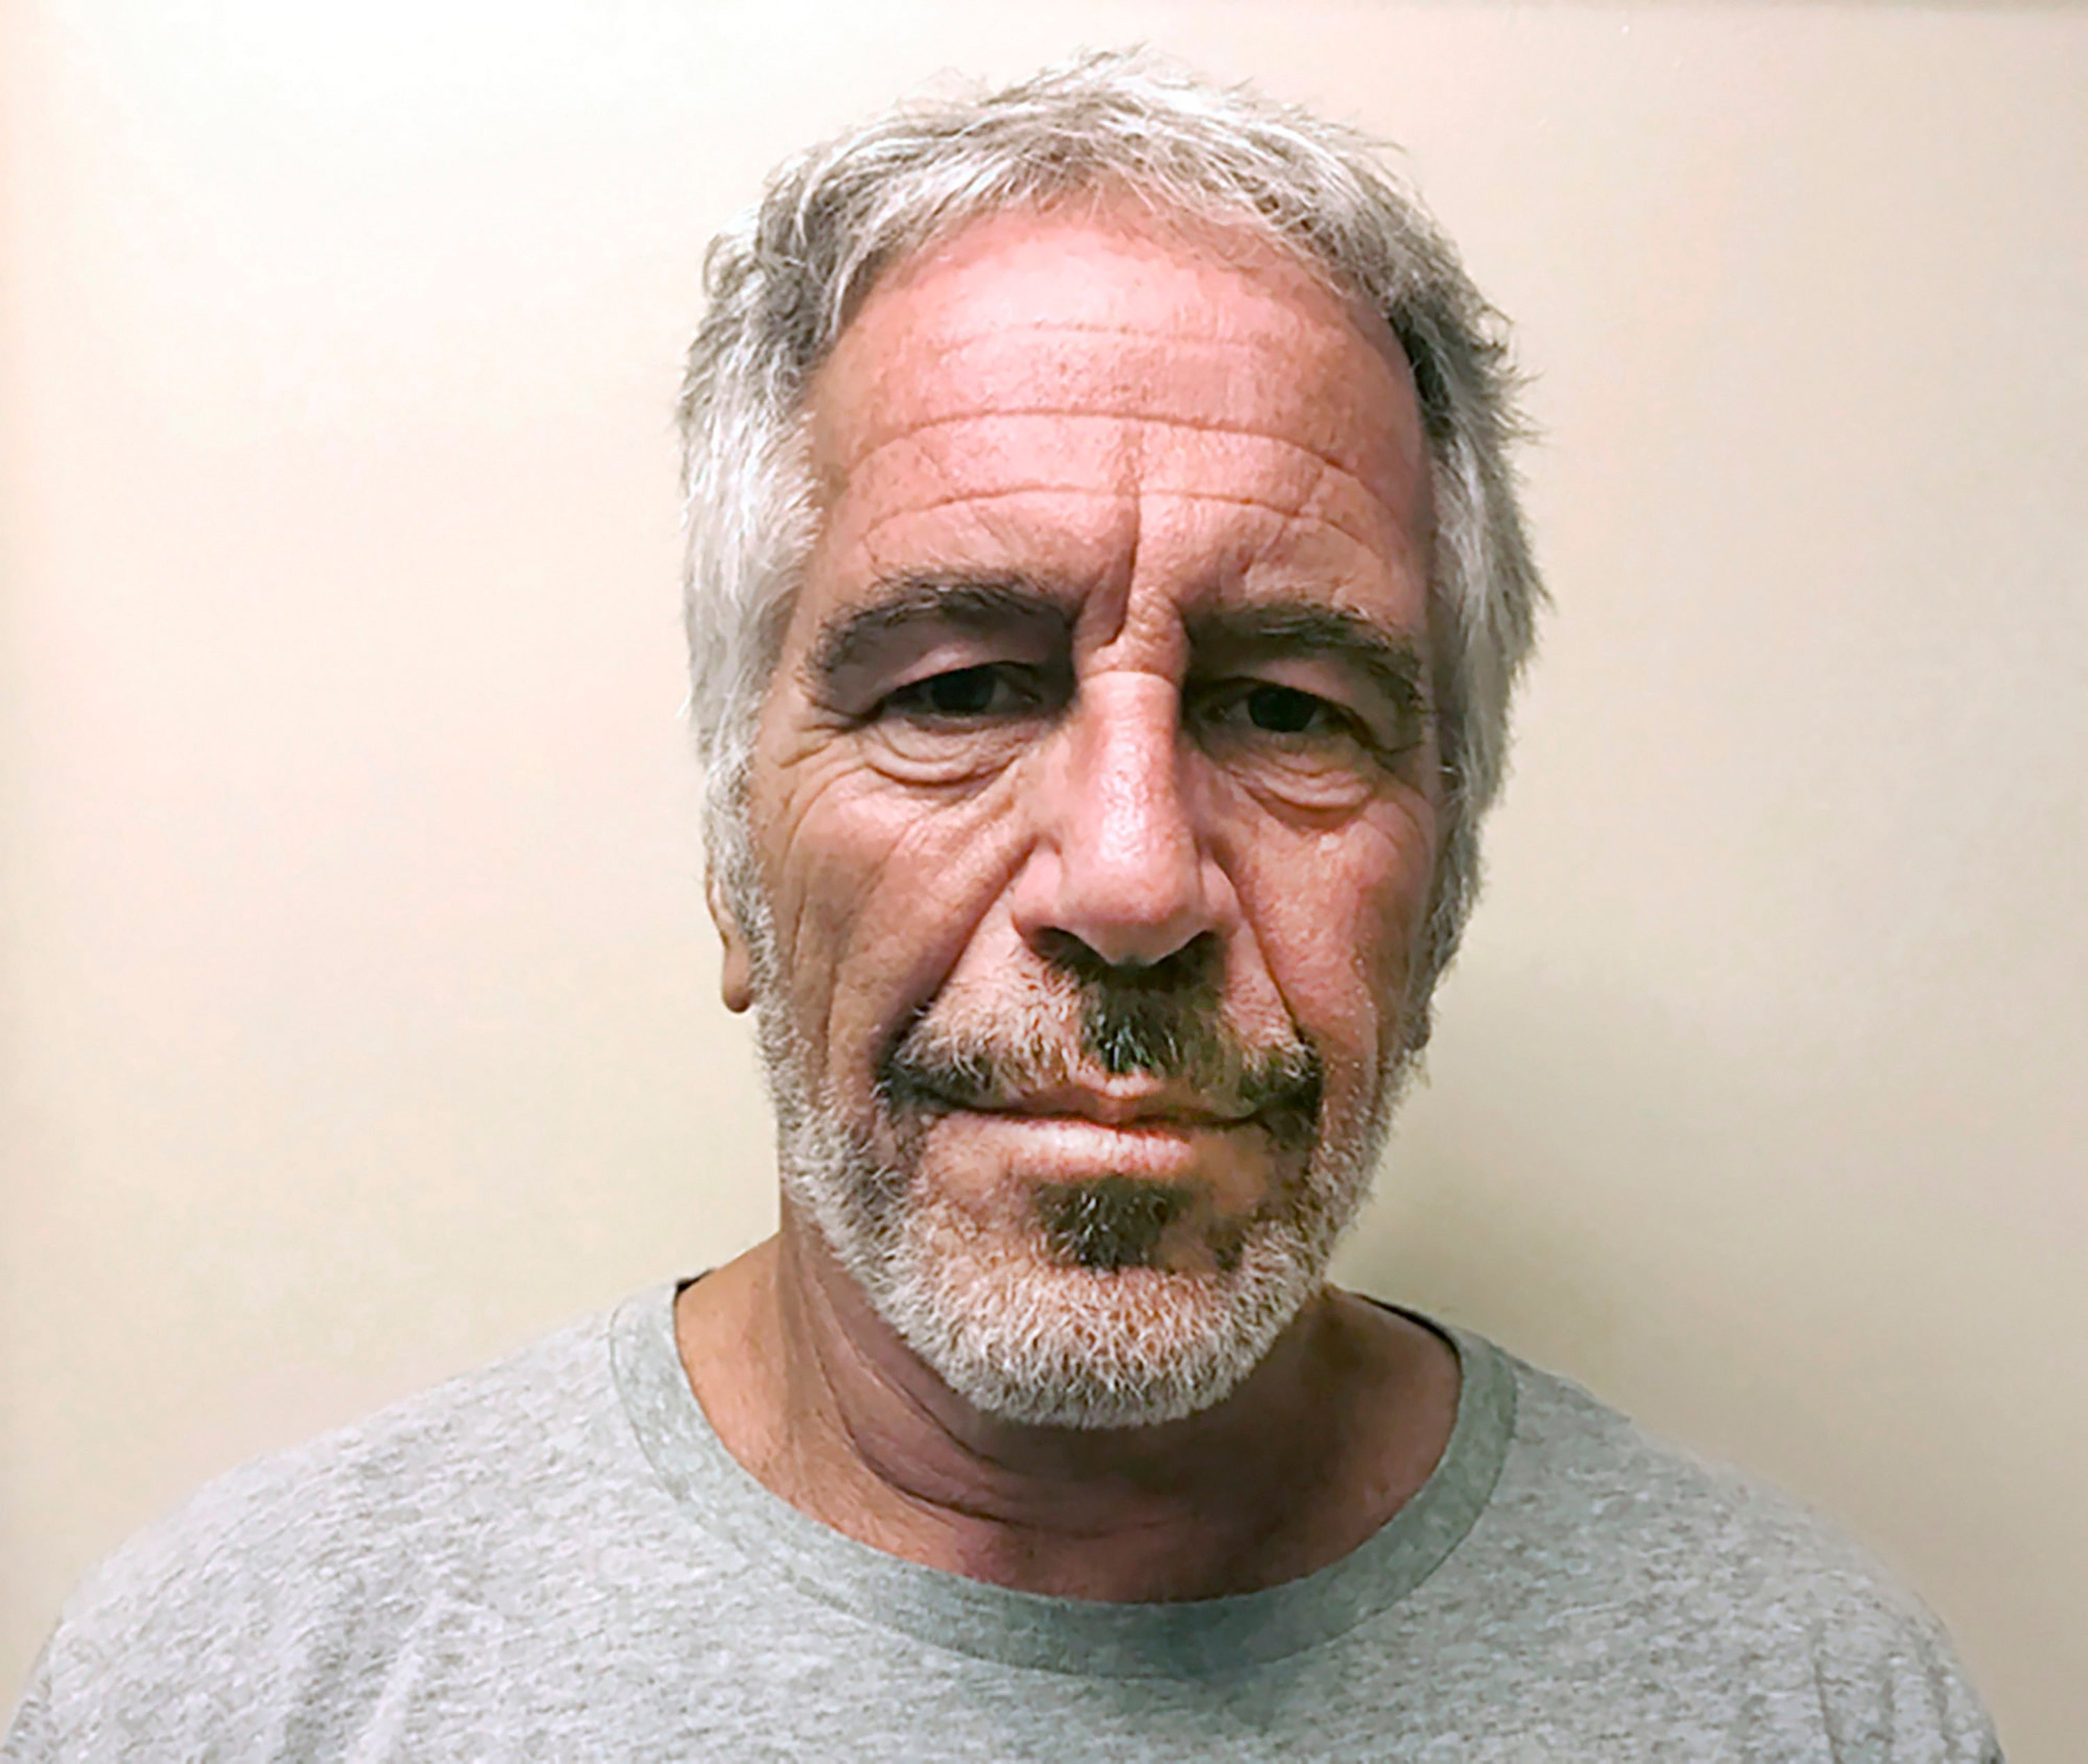 Jeffrey Epstein died in prison while awaiting trial in what was ruled a suicide